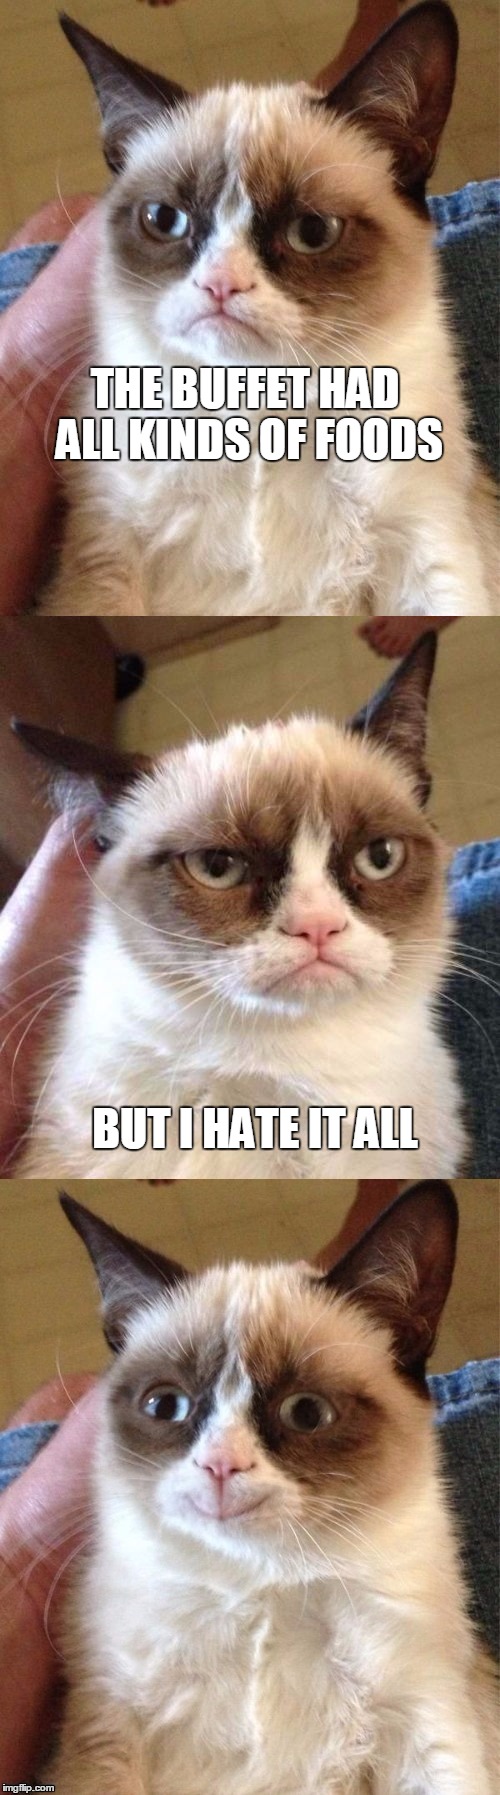 Bad Pun Grumpy Cat | THE BUFFET HAD ALL KINDS OF FOODS; BUT I HATE IT ALL | image tagged in bad pun grumpy cat,memes,play on words,funny,buffet | made w/ Imgflip meme maker